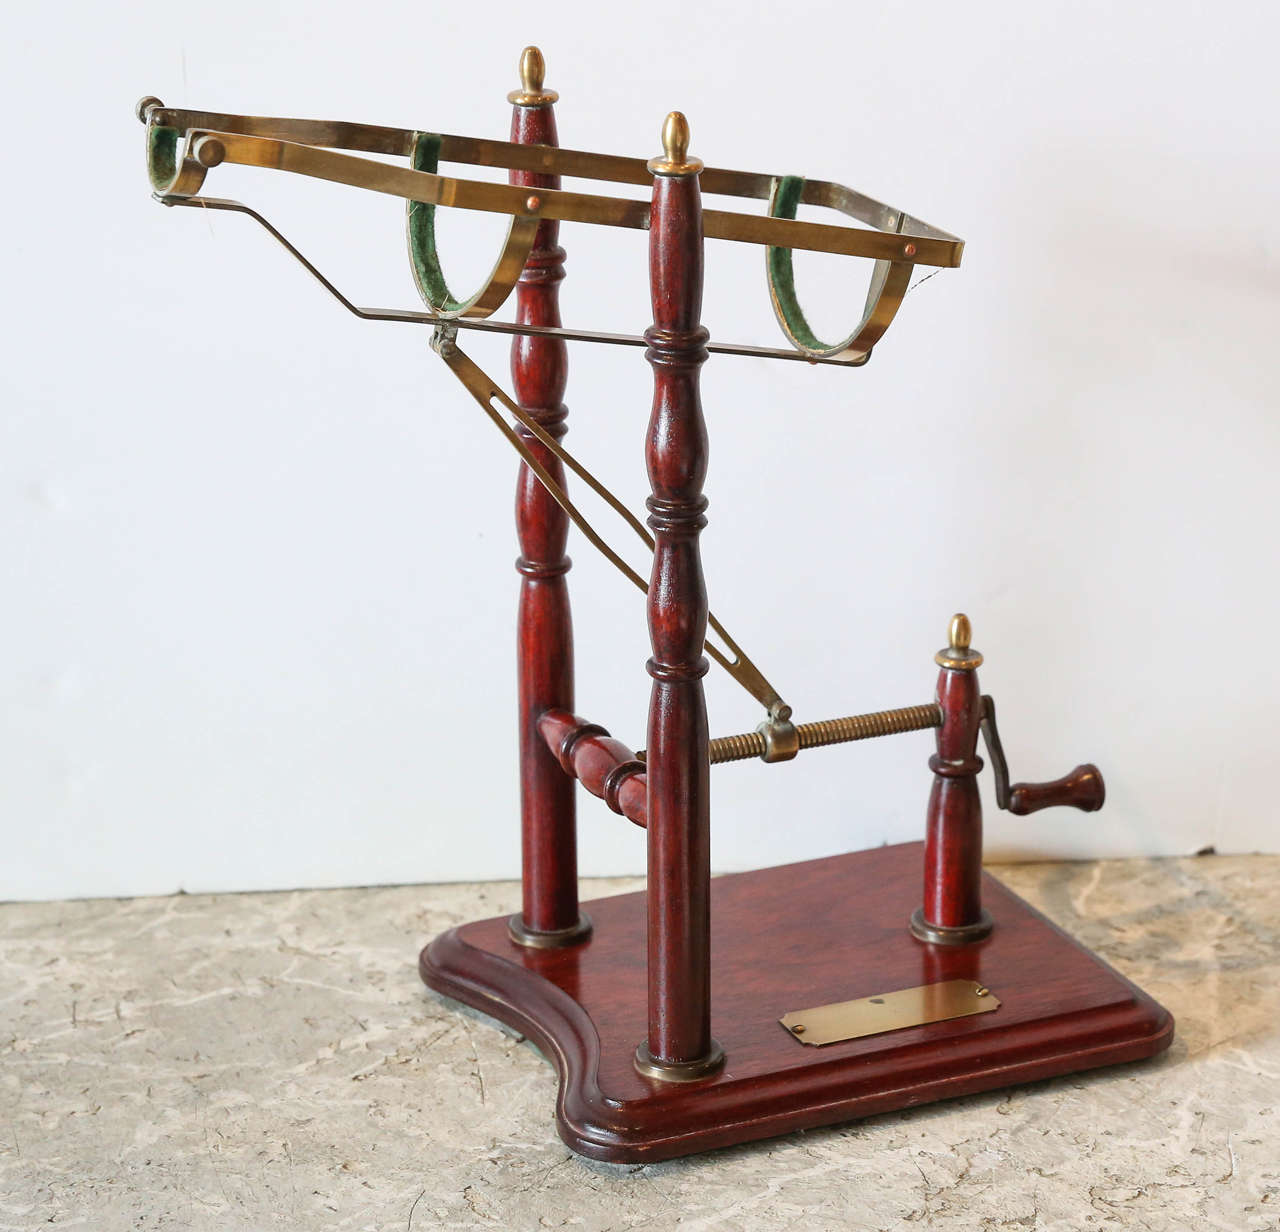 Early 20th century French wine decanter used to make sure that the sediment in the bottle remained at the bottom and was not poured into the glasses. This mechanical device controlled the pour.